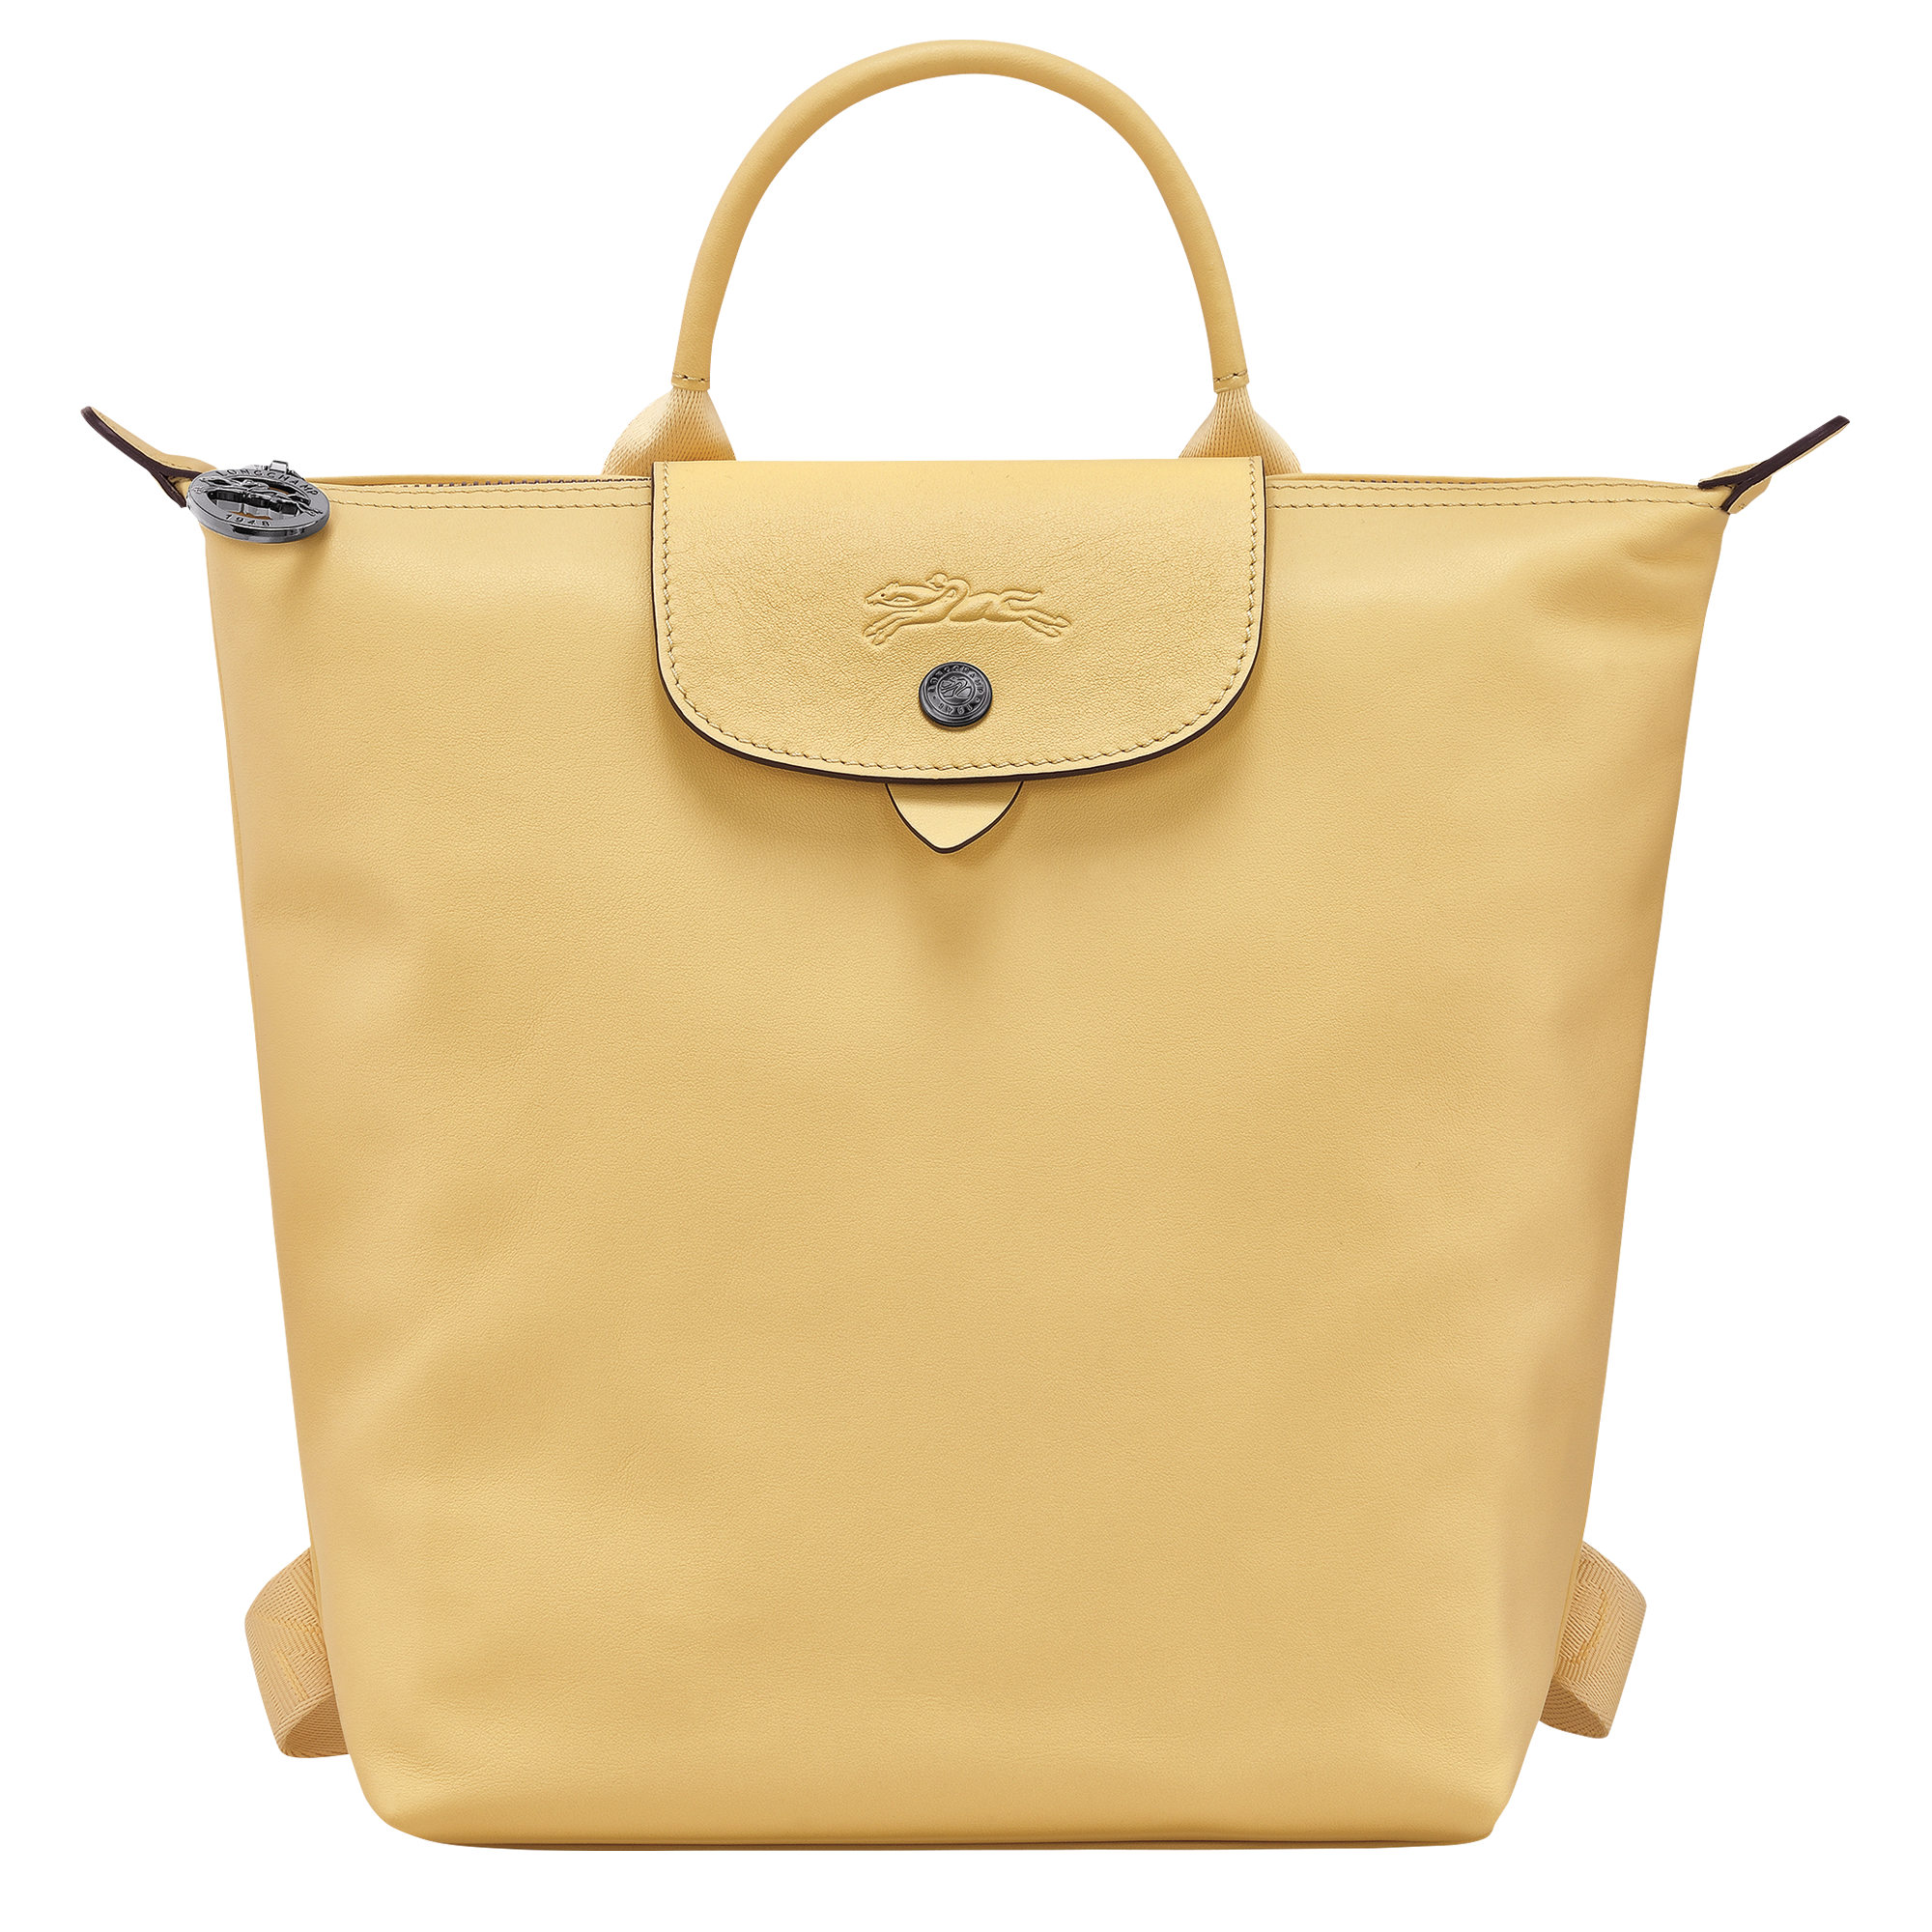 BAG REVIEW (Longchamp Le Pliage Filet), Gallery posted by putri.